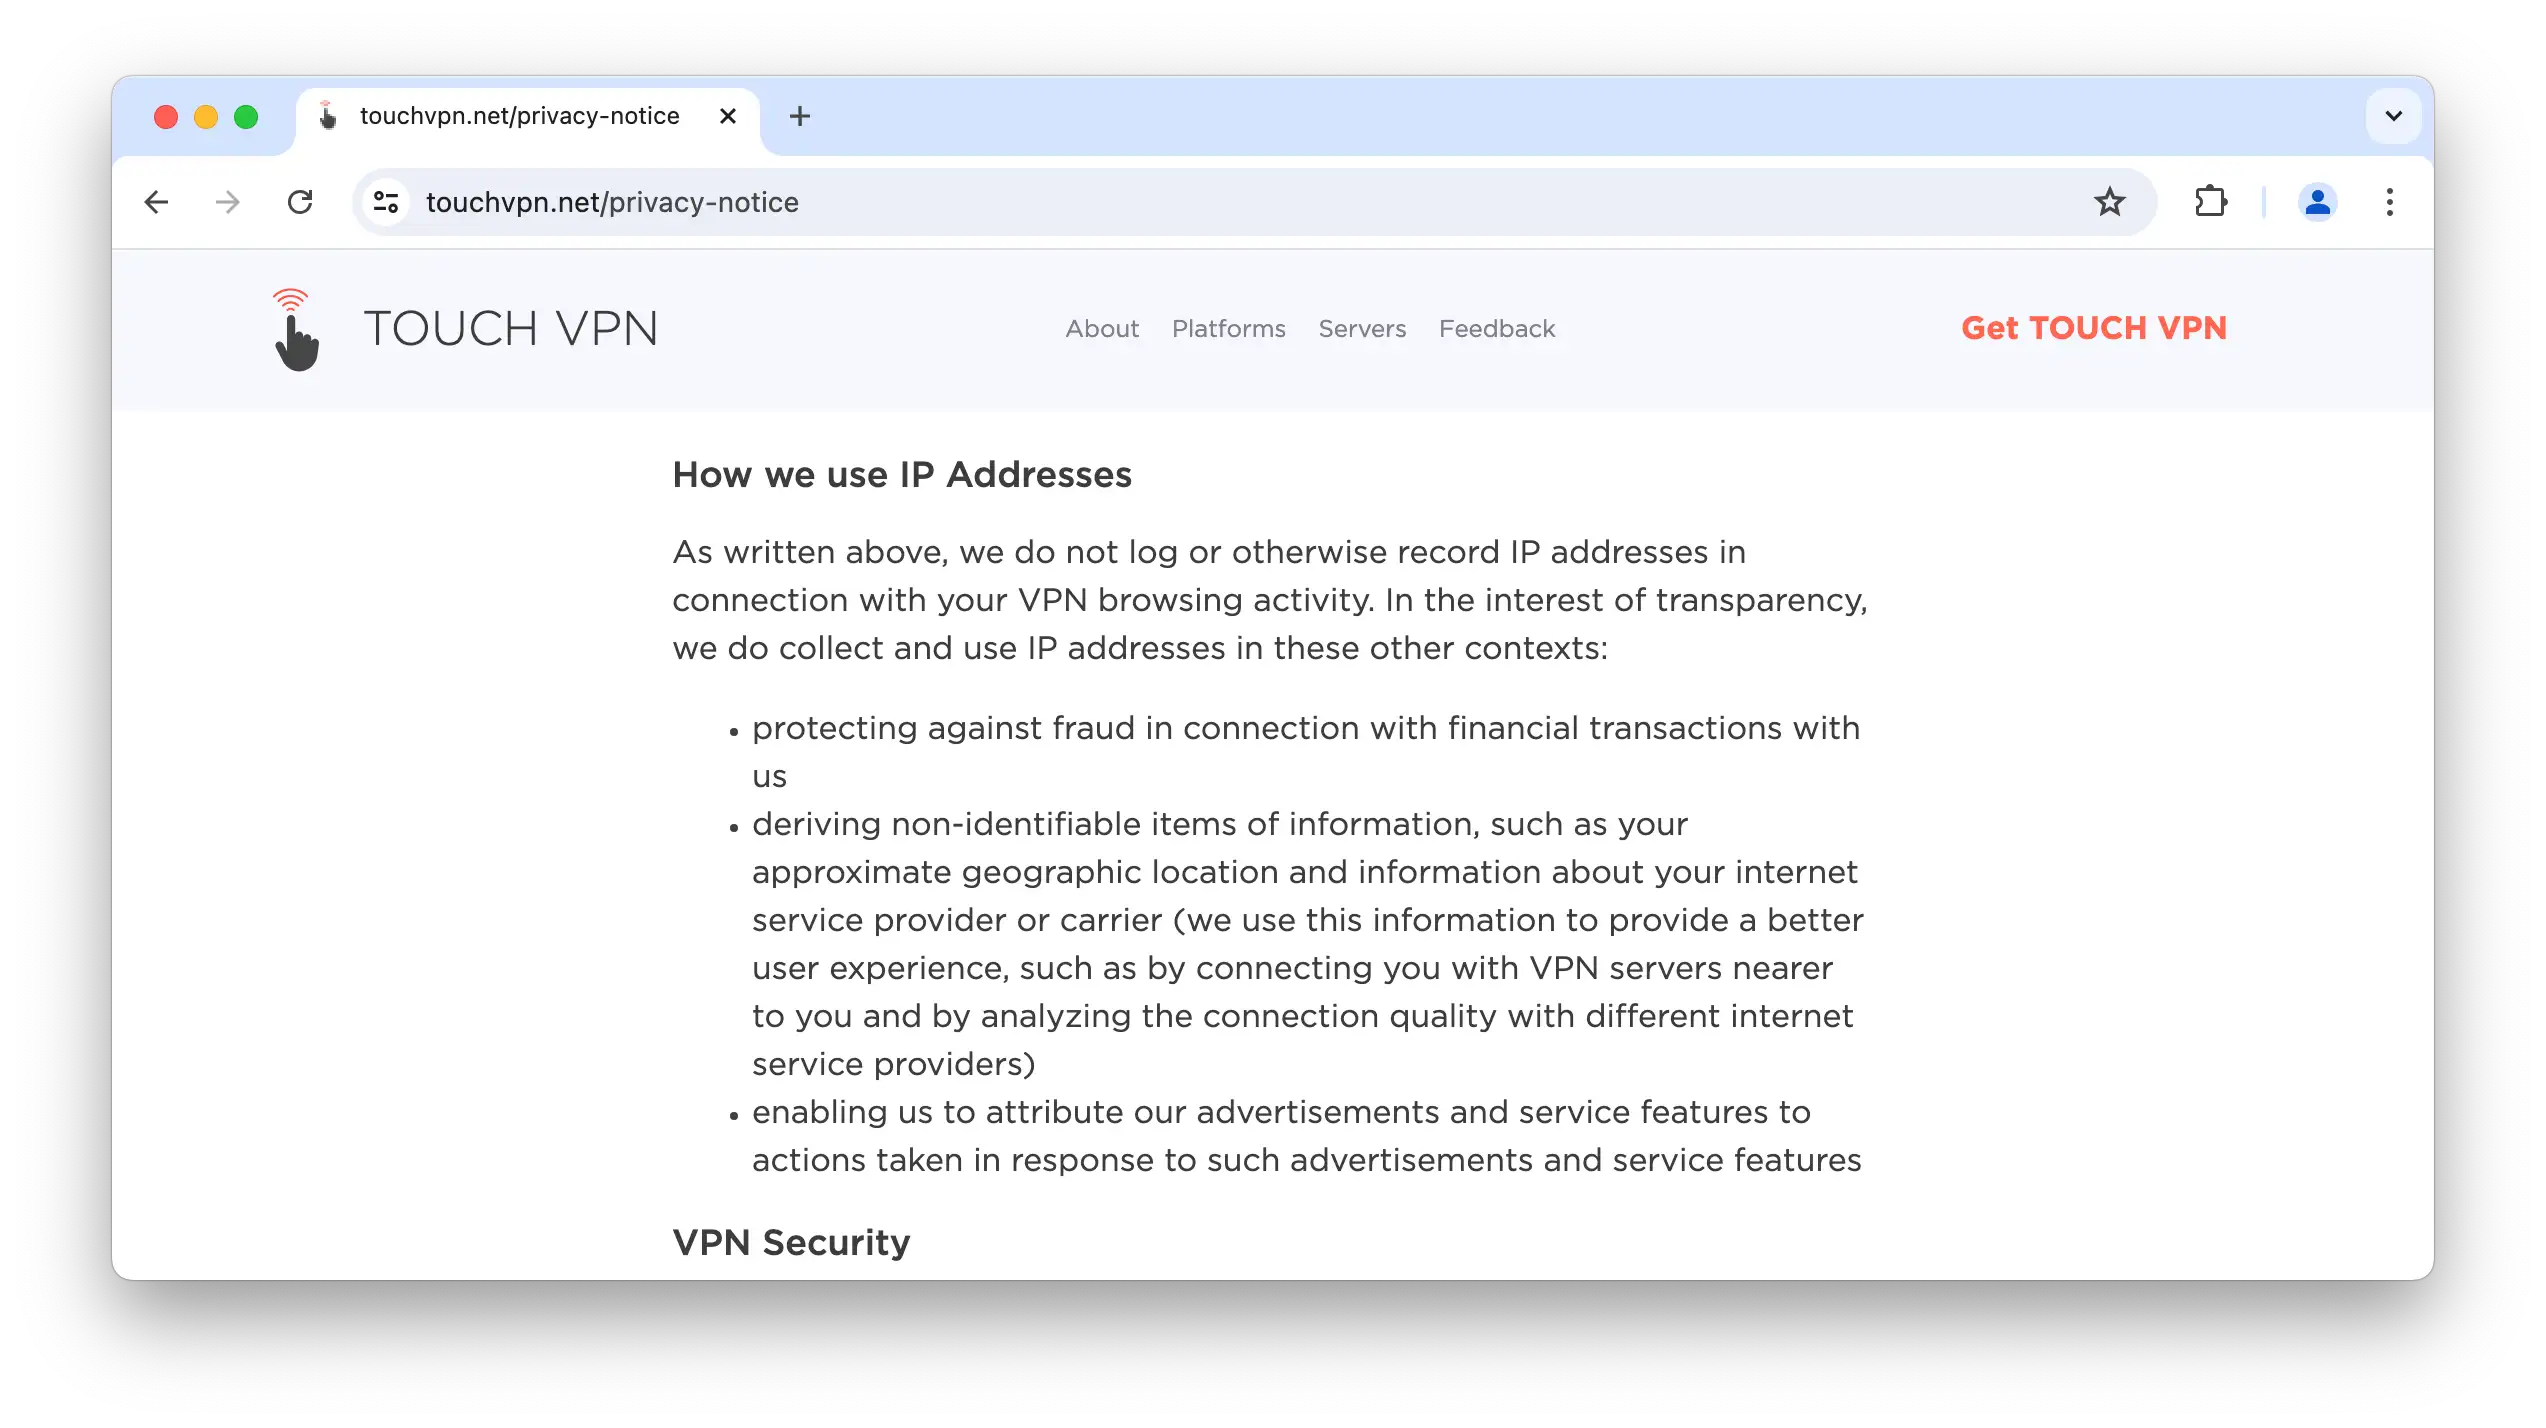 Extract from Touch VPN's privacy policy